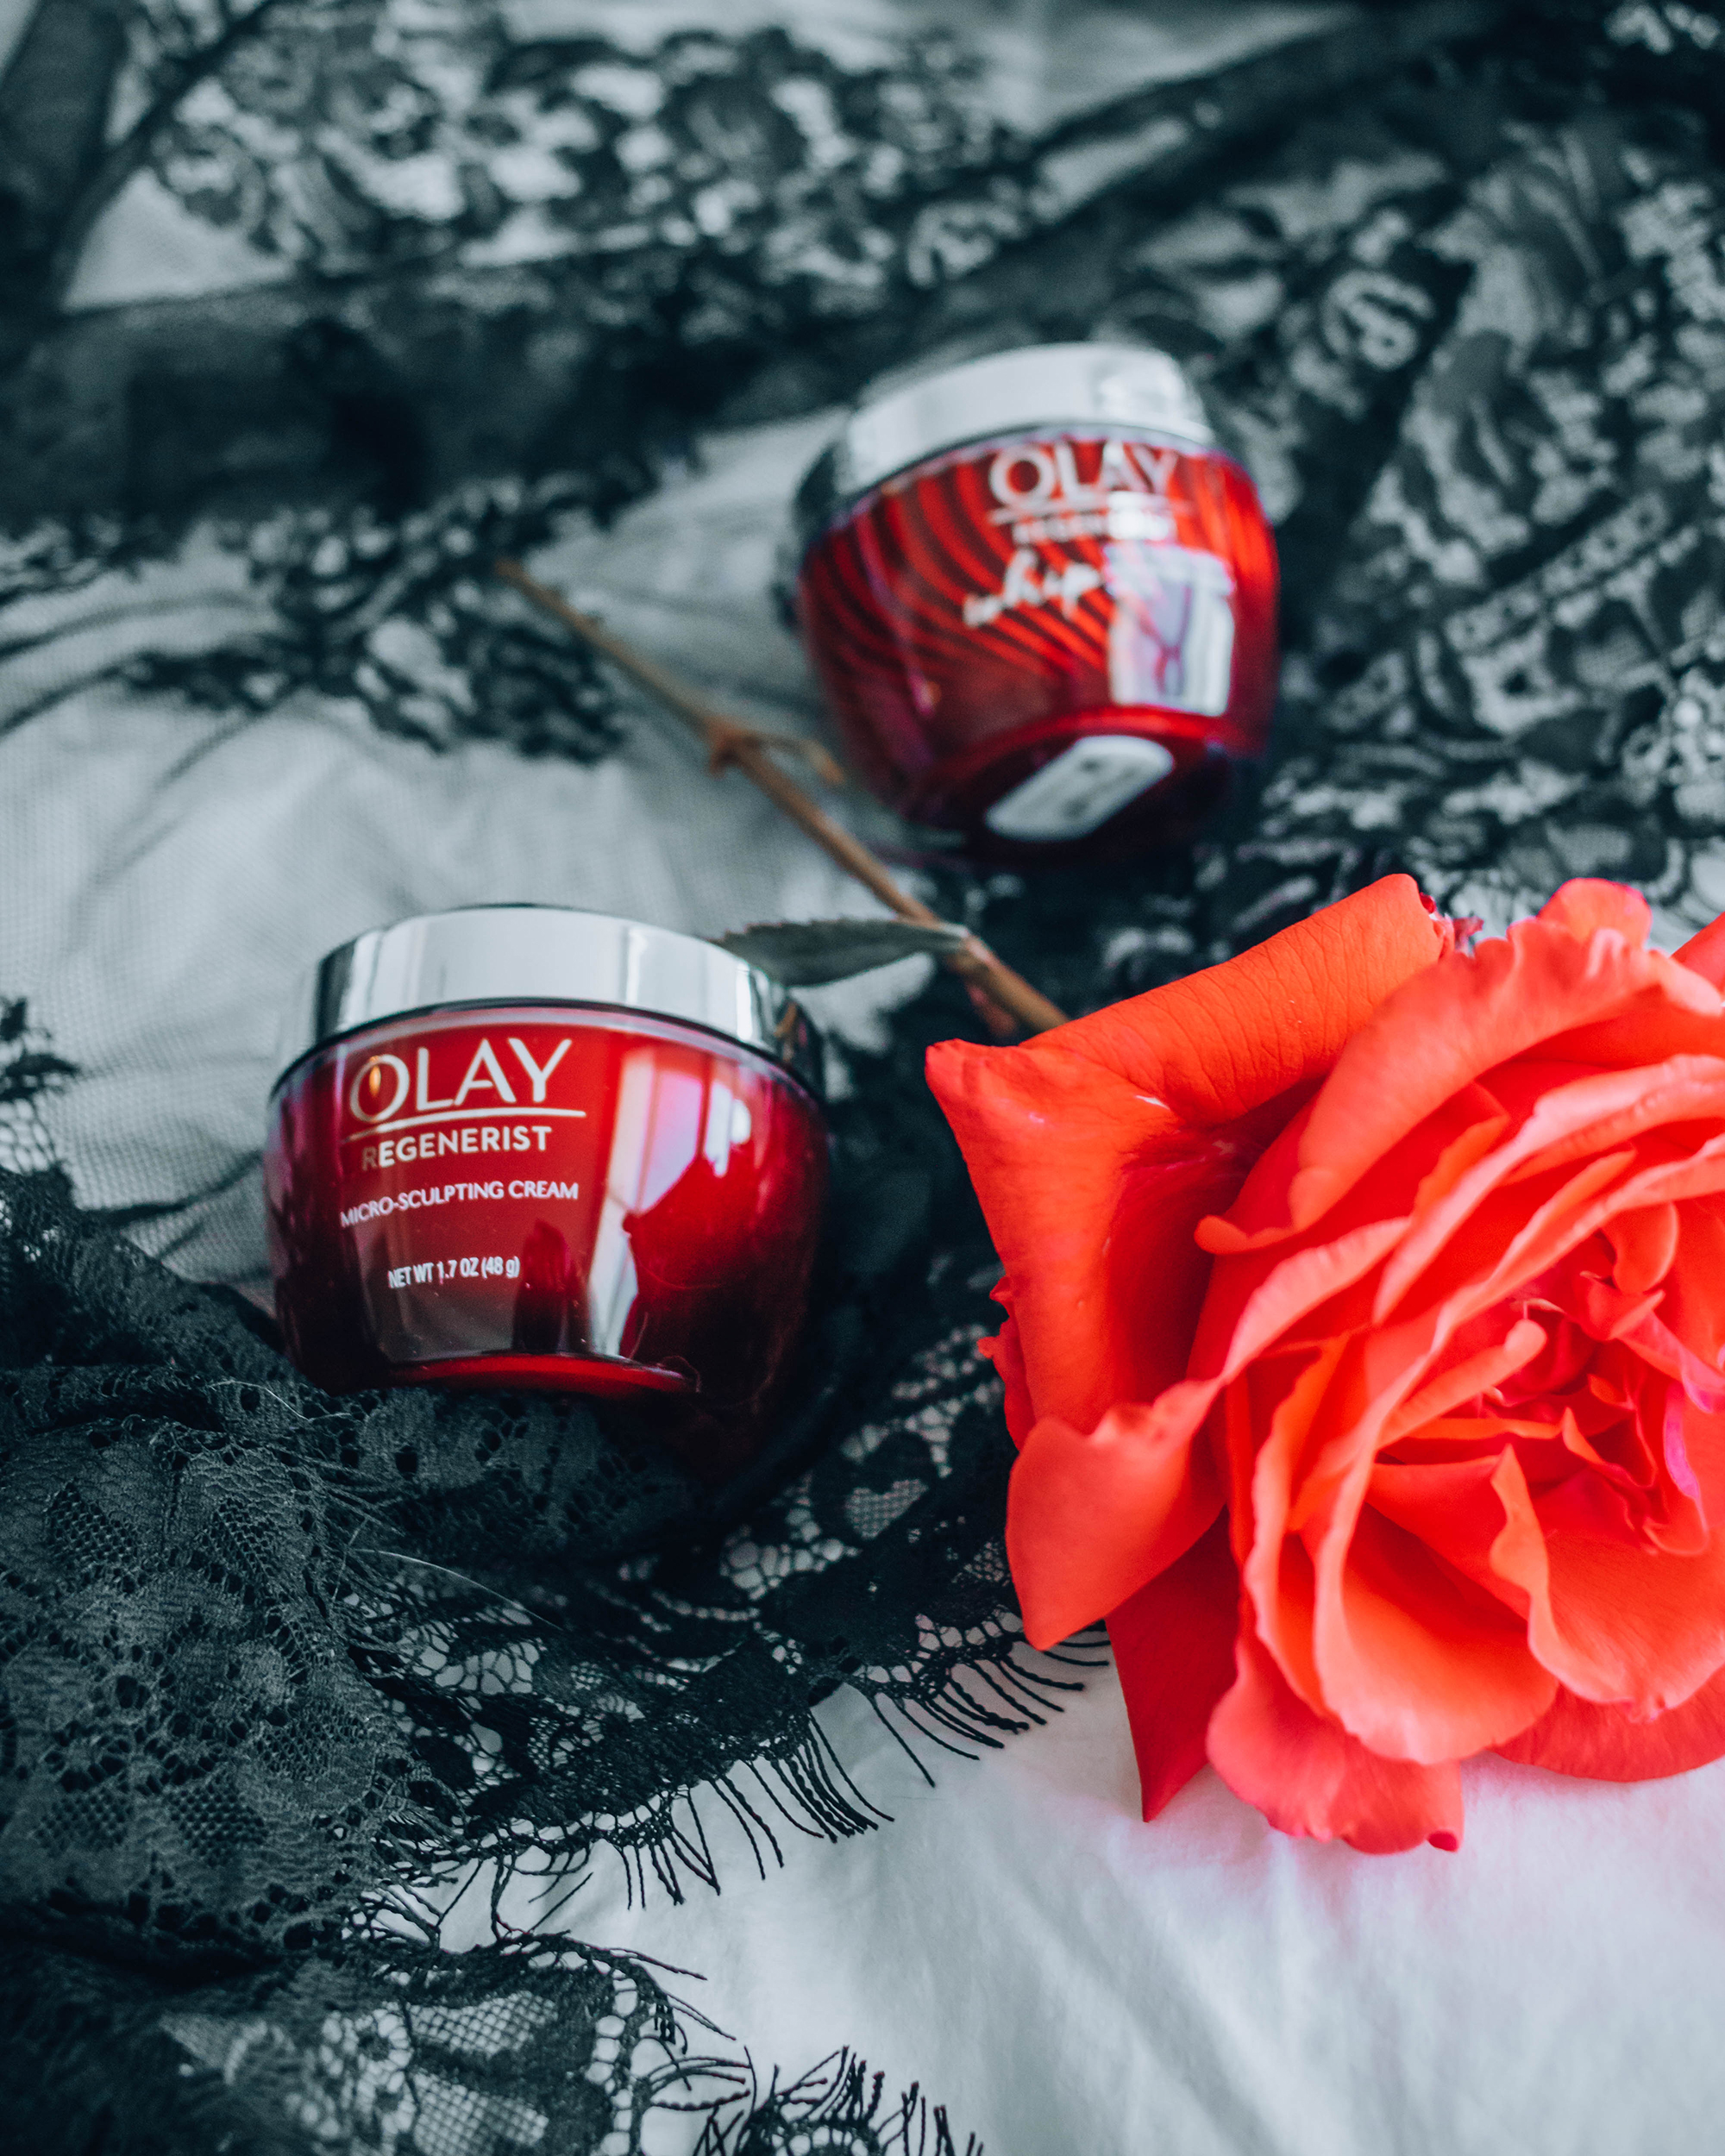 Olay red jar skincare bottles laying on a lace shawl next to a rose